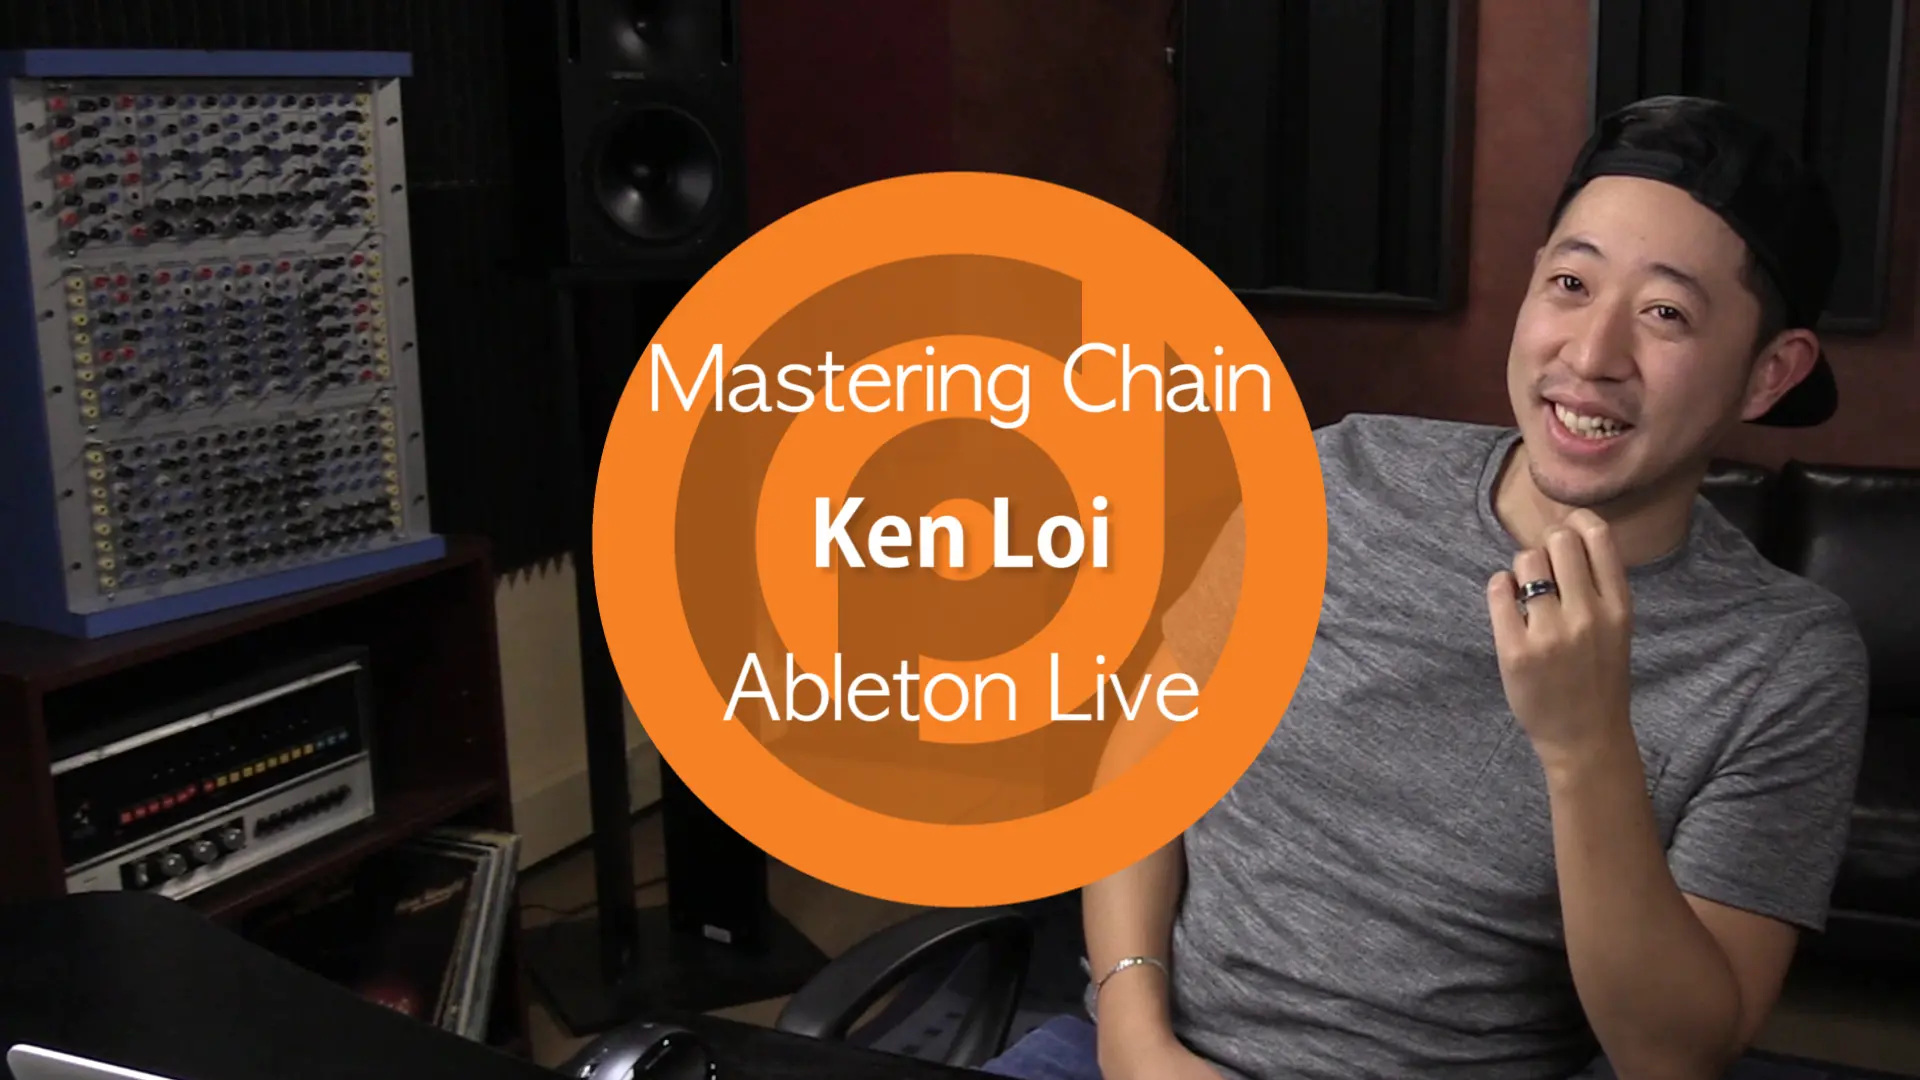 Mastering chain is an essential part of any music production program. With the expertise of ken loo and adeleon, this live mastering chain takes your tracks to the next level.